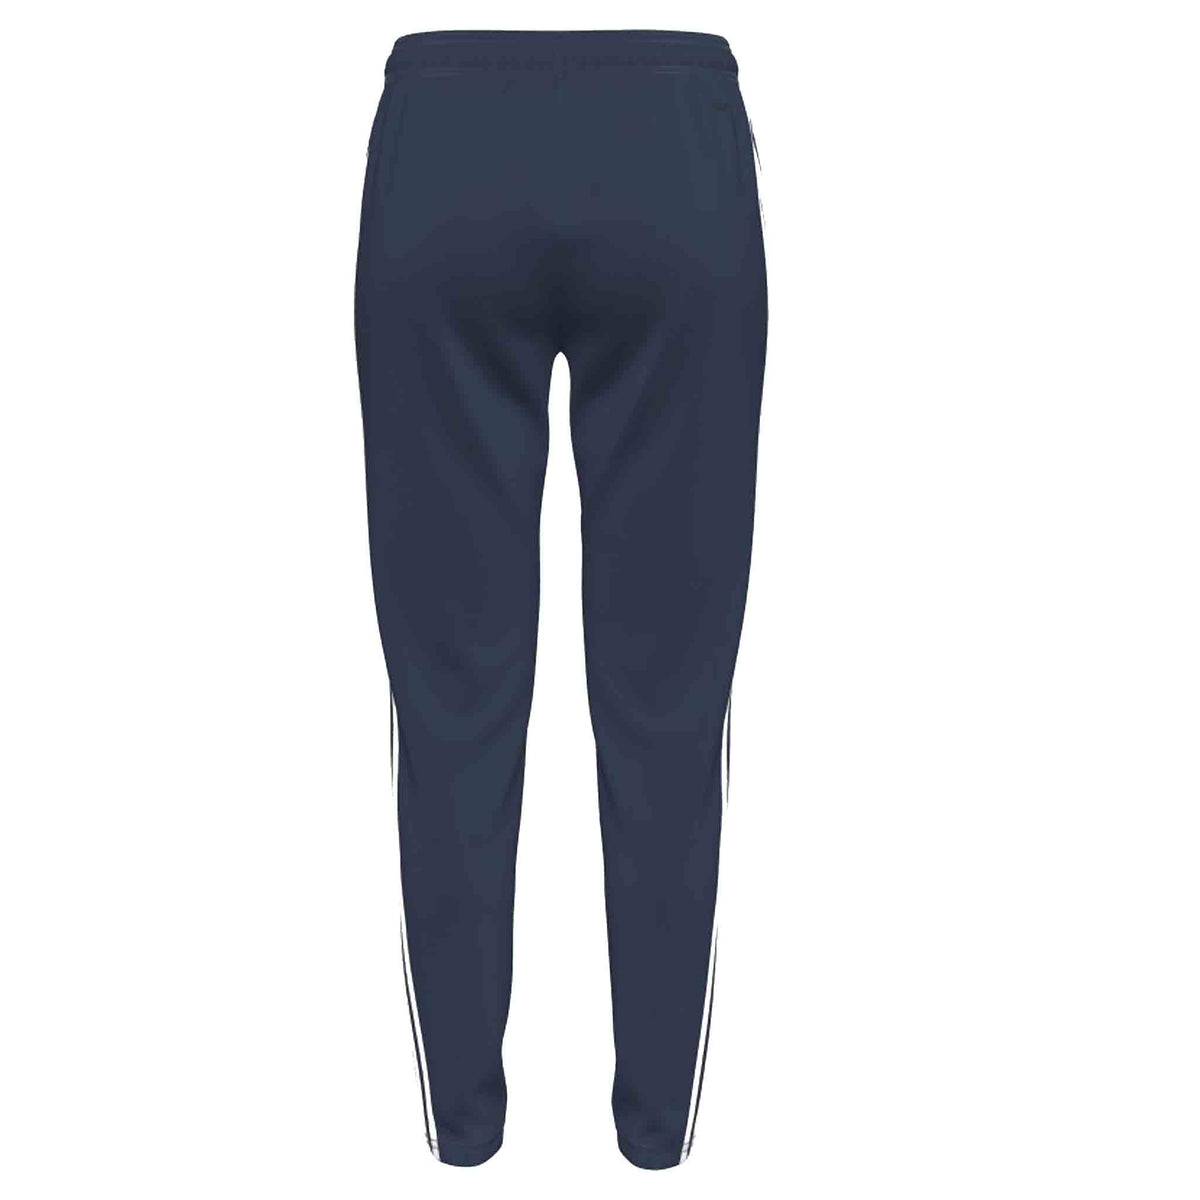 Hampstead and Westminster HC Women's Training Pants